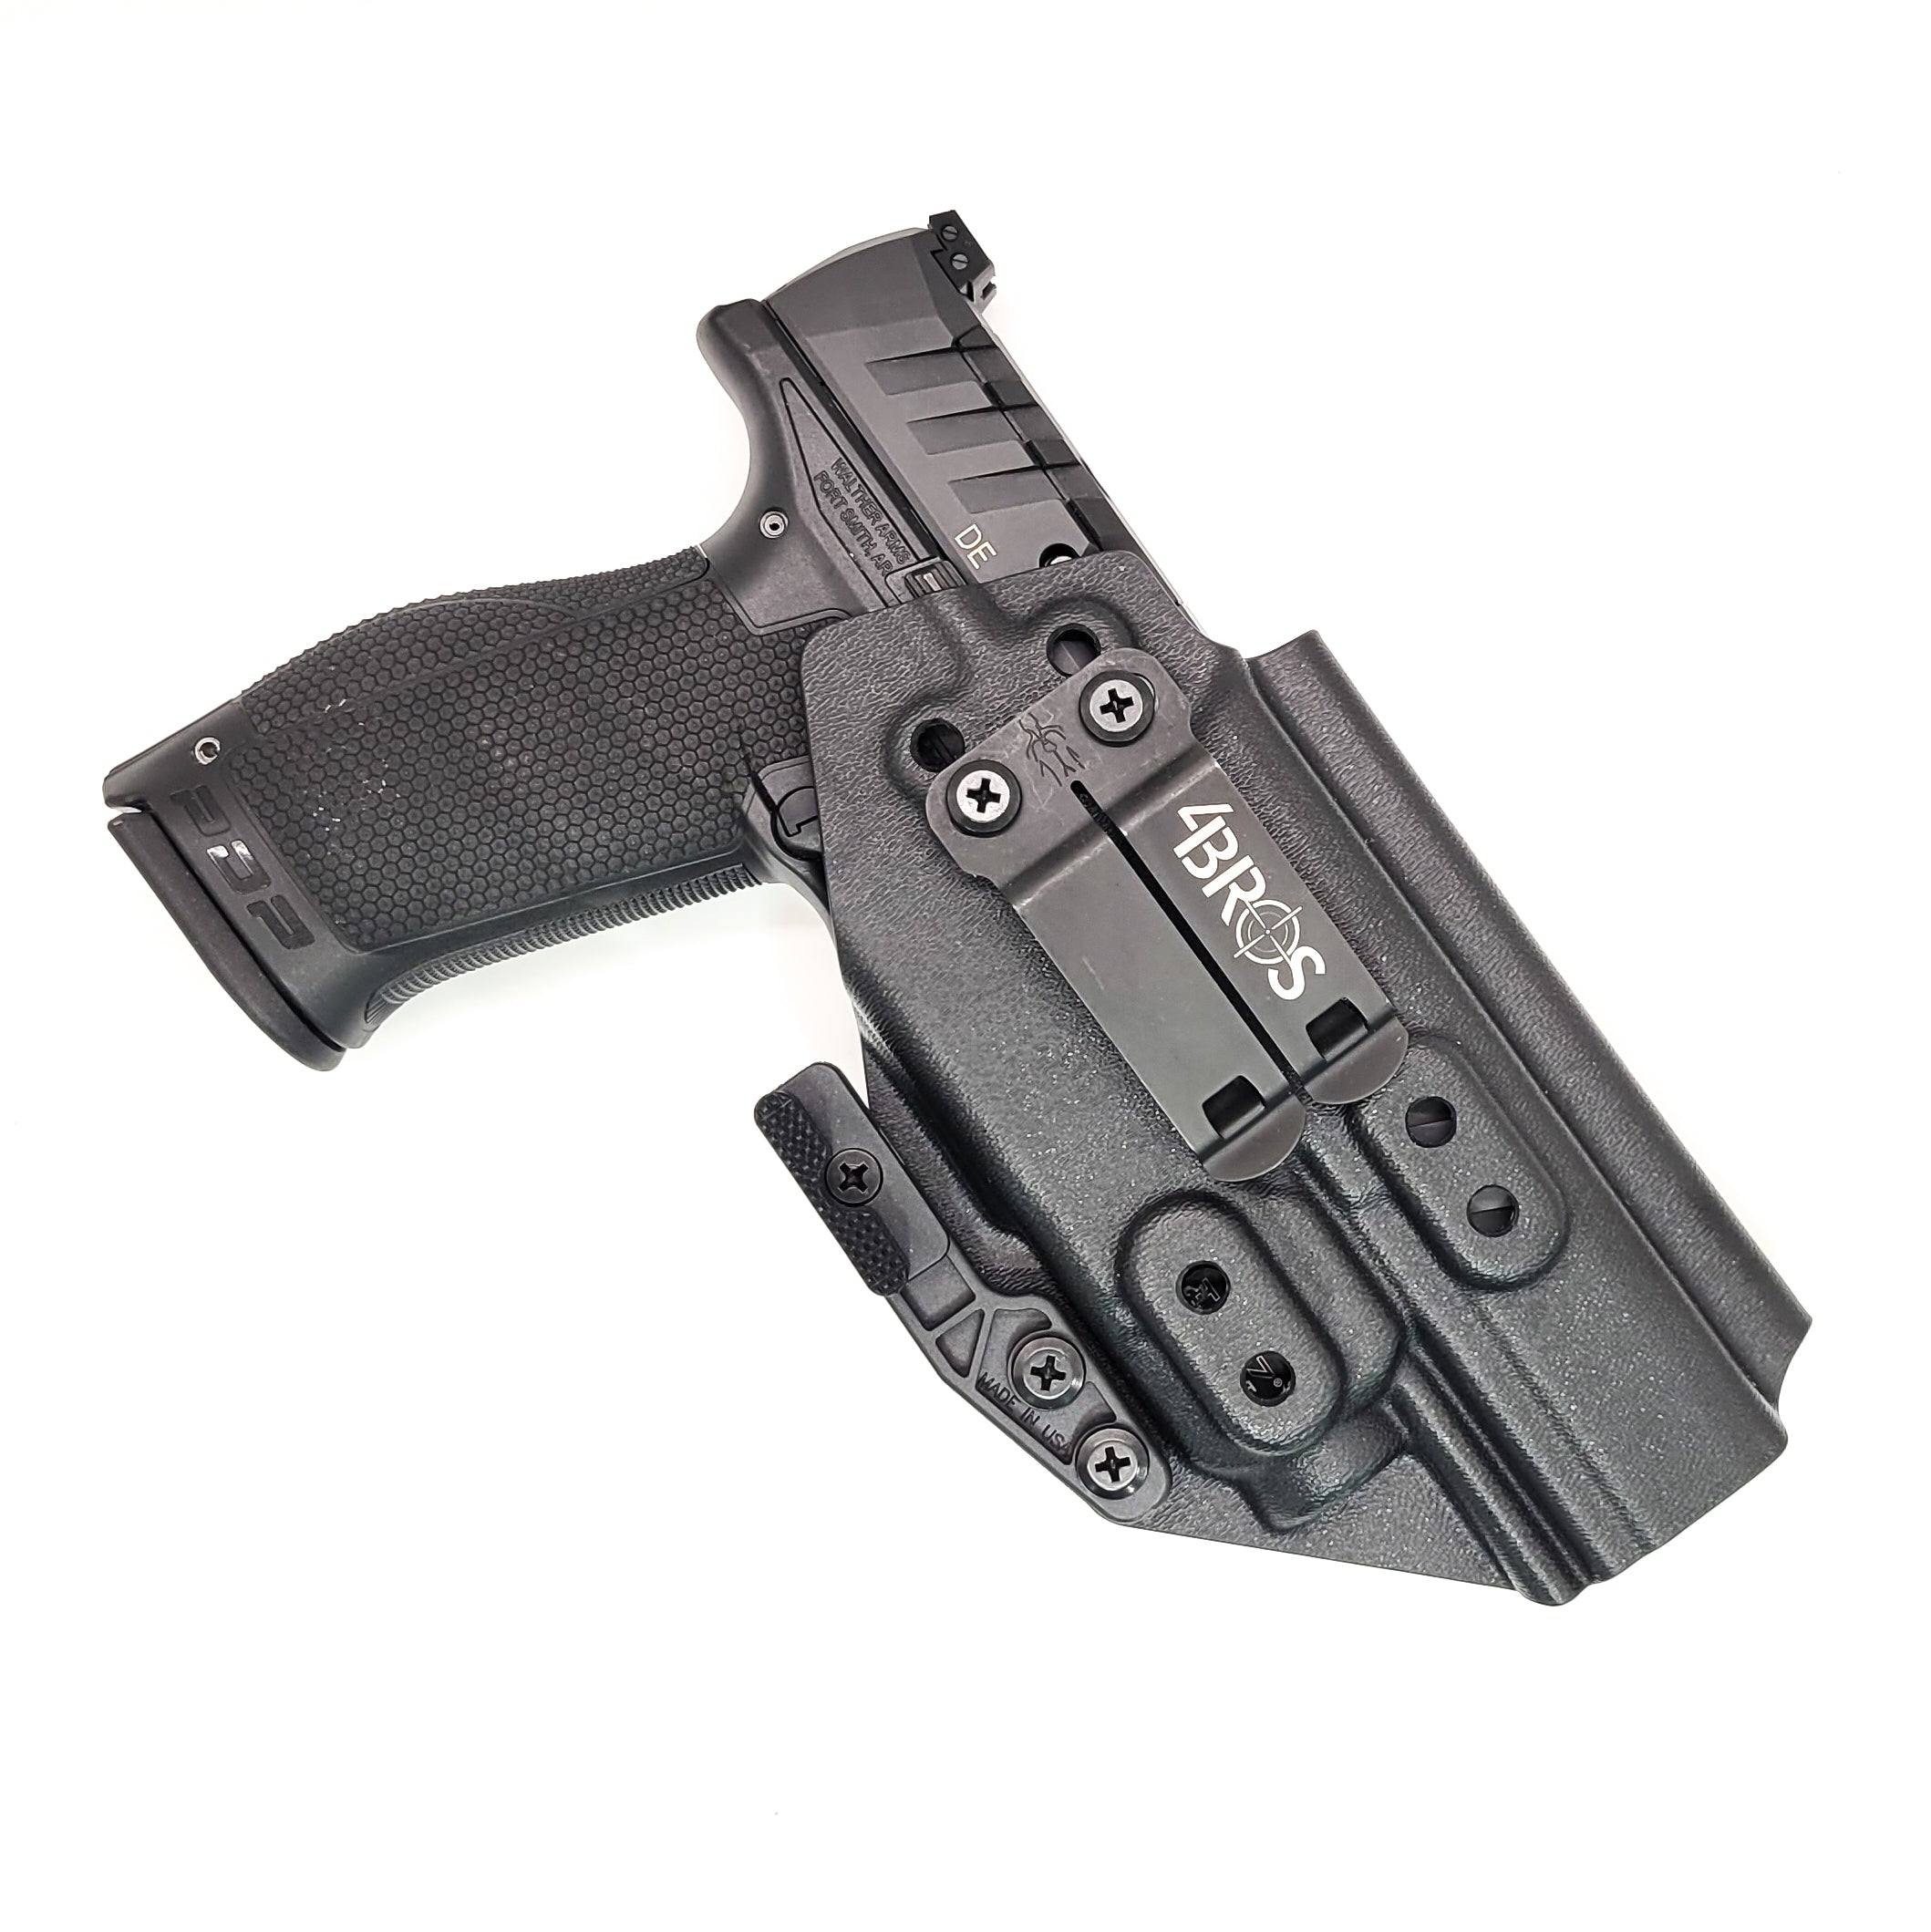 For the best concealed carry Inside Waistband IWB AIWB Holster designed to fit the Walther PDP Compact 5" pistol with Streamlight TLR-7A or TLR-7 on the firearm, shop Four Brothers Holsters. Cut for red dot sight, full sweat guard, adjustable retention & open muzzle for threaded barrels & compensators.